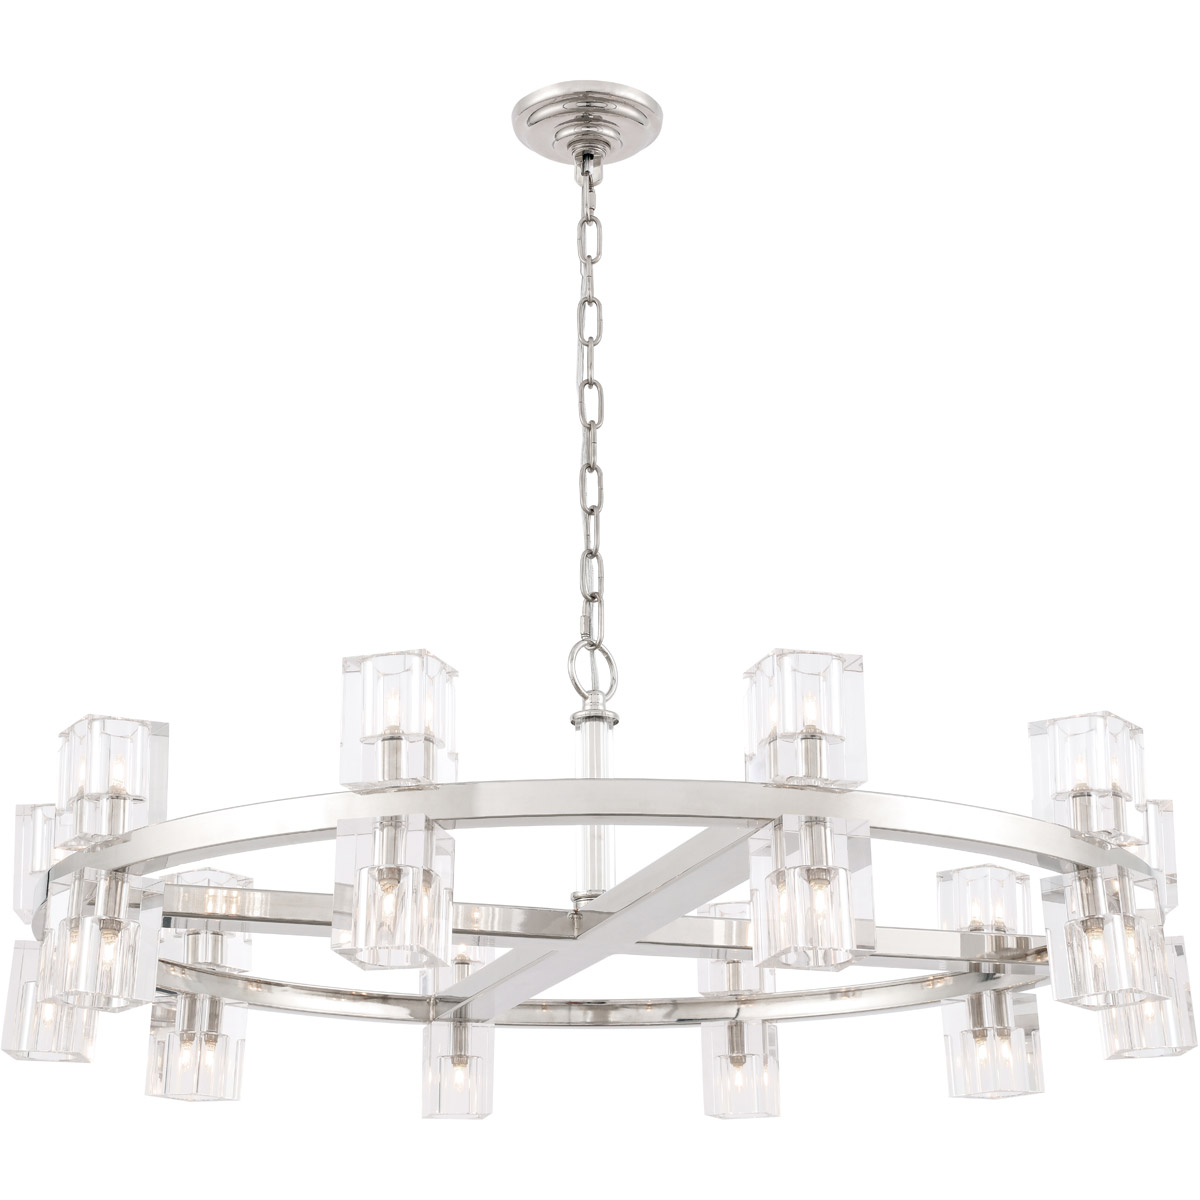 1550d36pn Chateau 20 Light Polished Nickel Ceiling Pendant